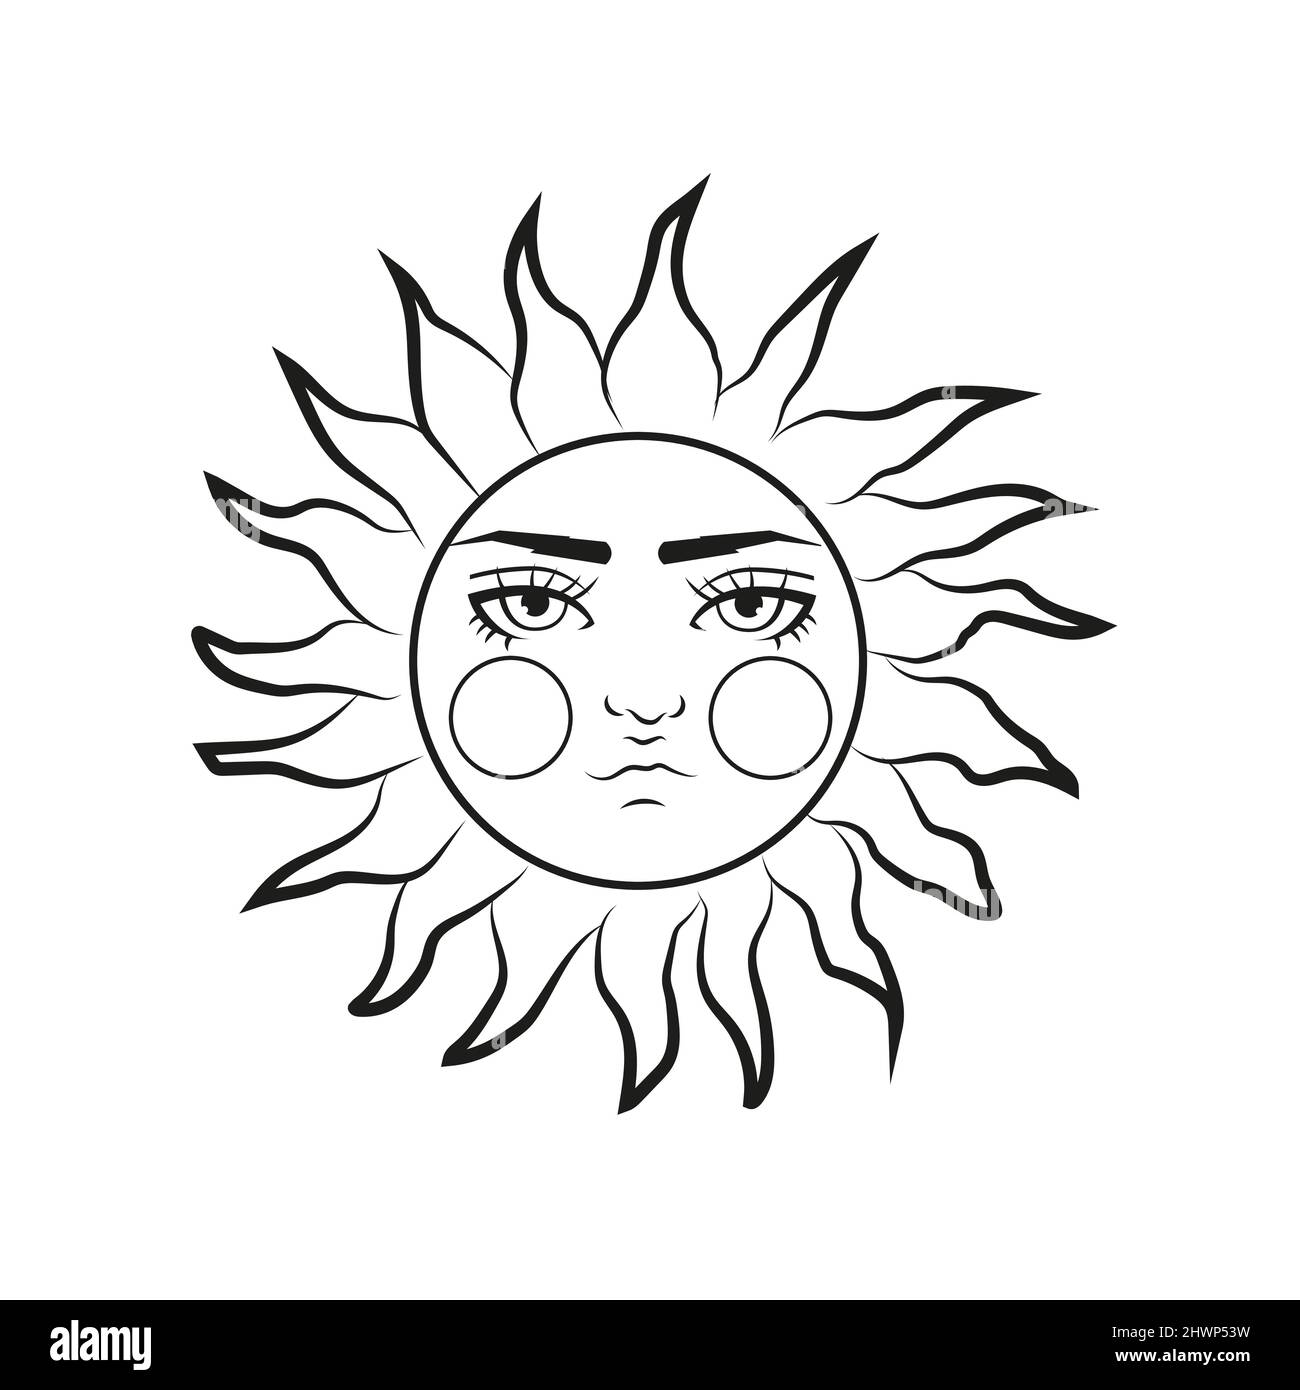 Bohemian illustration, stylized vintage design, sun with face and closed eyes, stylized drawing, tarot card. Stock Vector